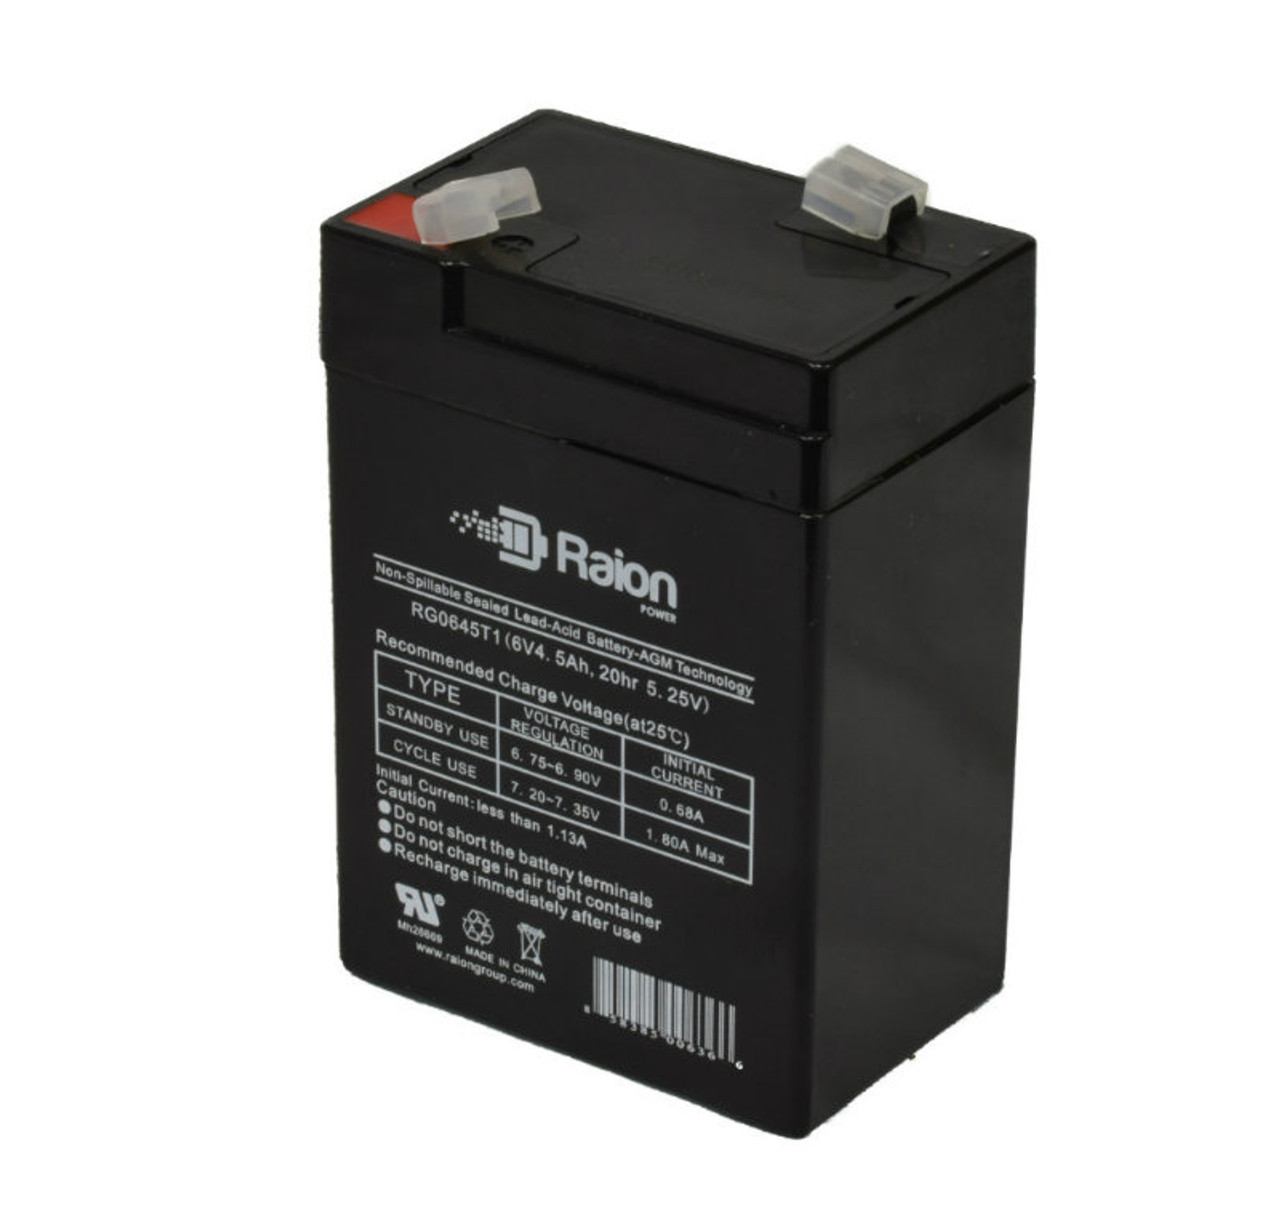 Raion Power RG0645T1 6V 4.5Ah Replacement Battery Cartridge for XNB SN06004.5